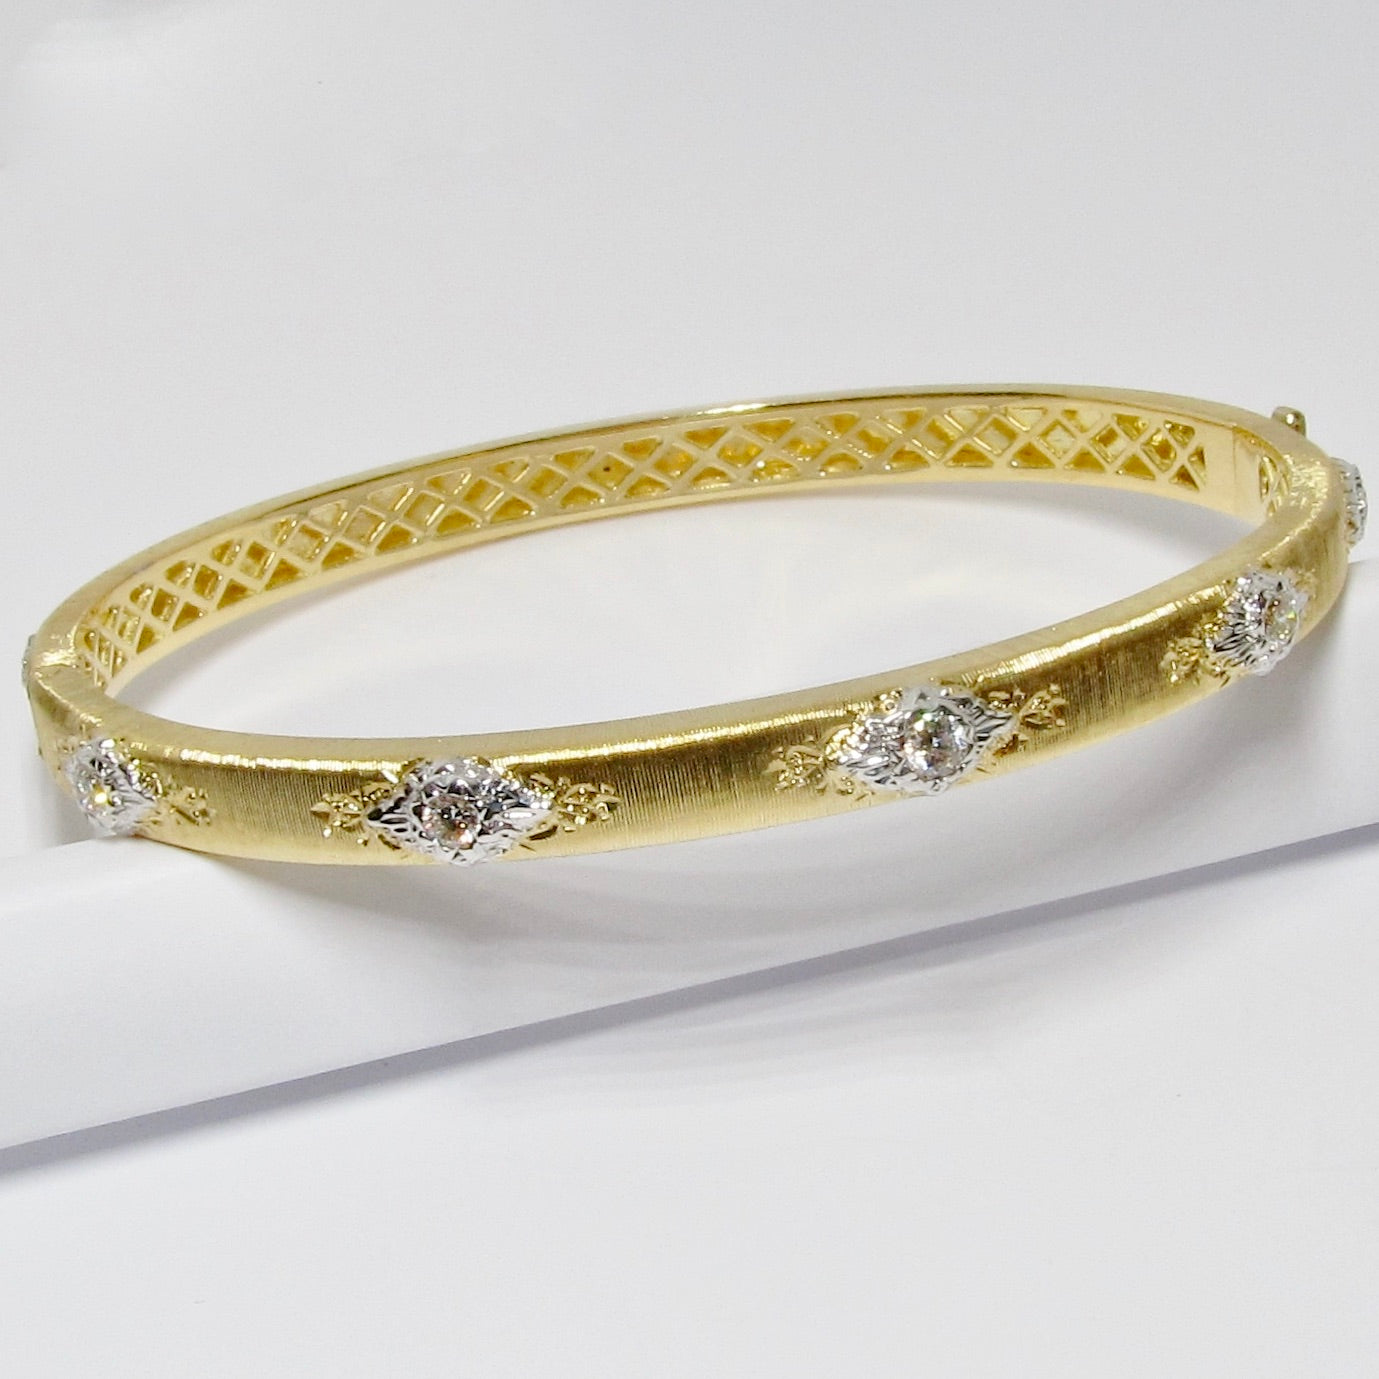 18k Yellow Gold Bangle Bracelet with Diamond Accents